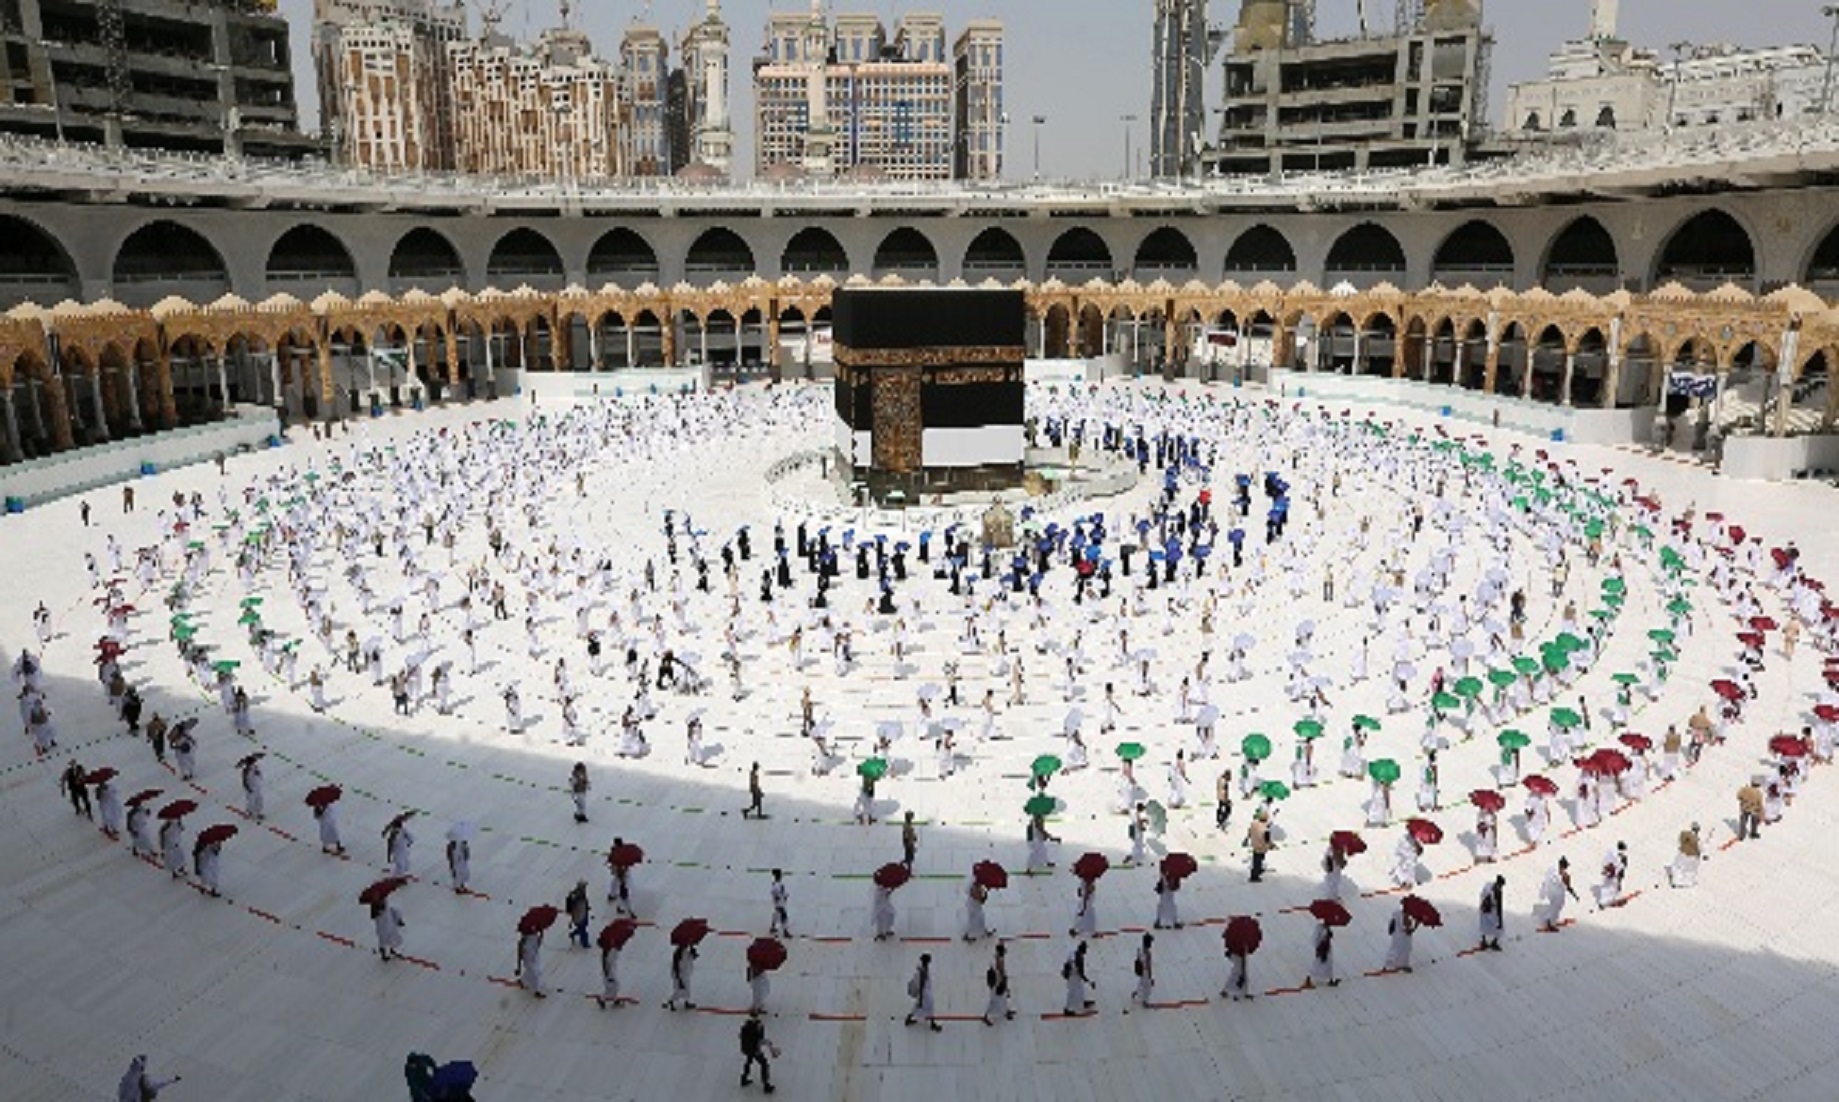 COVID: Malaysia Detects 219 Positive Cases, 16 Clusters Involving Umrah Pilgrims